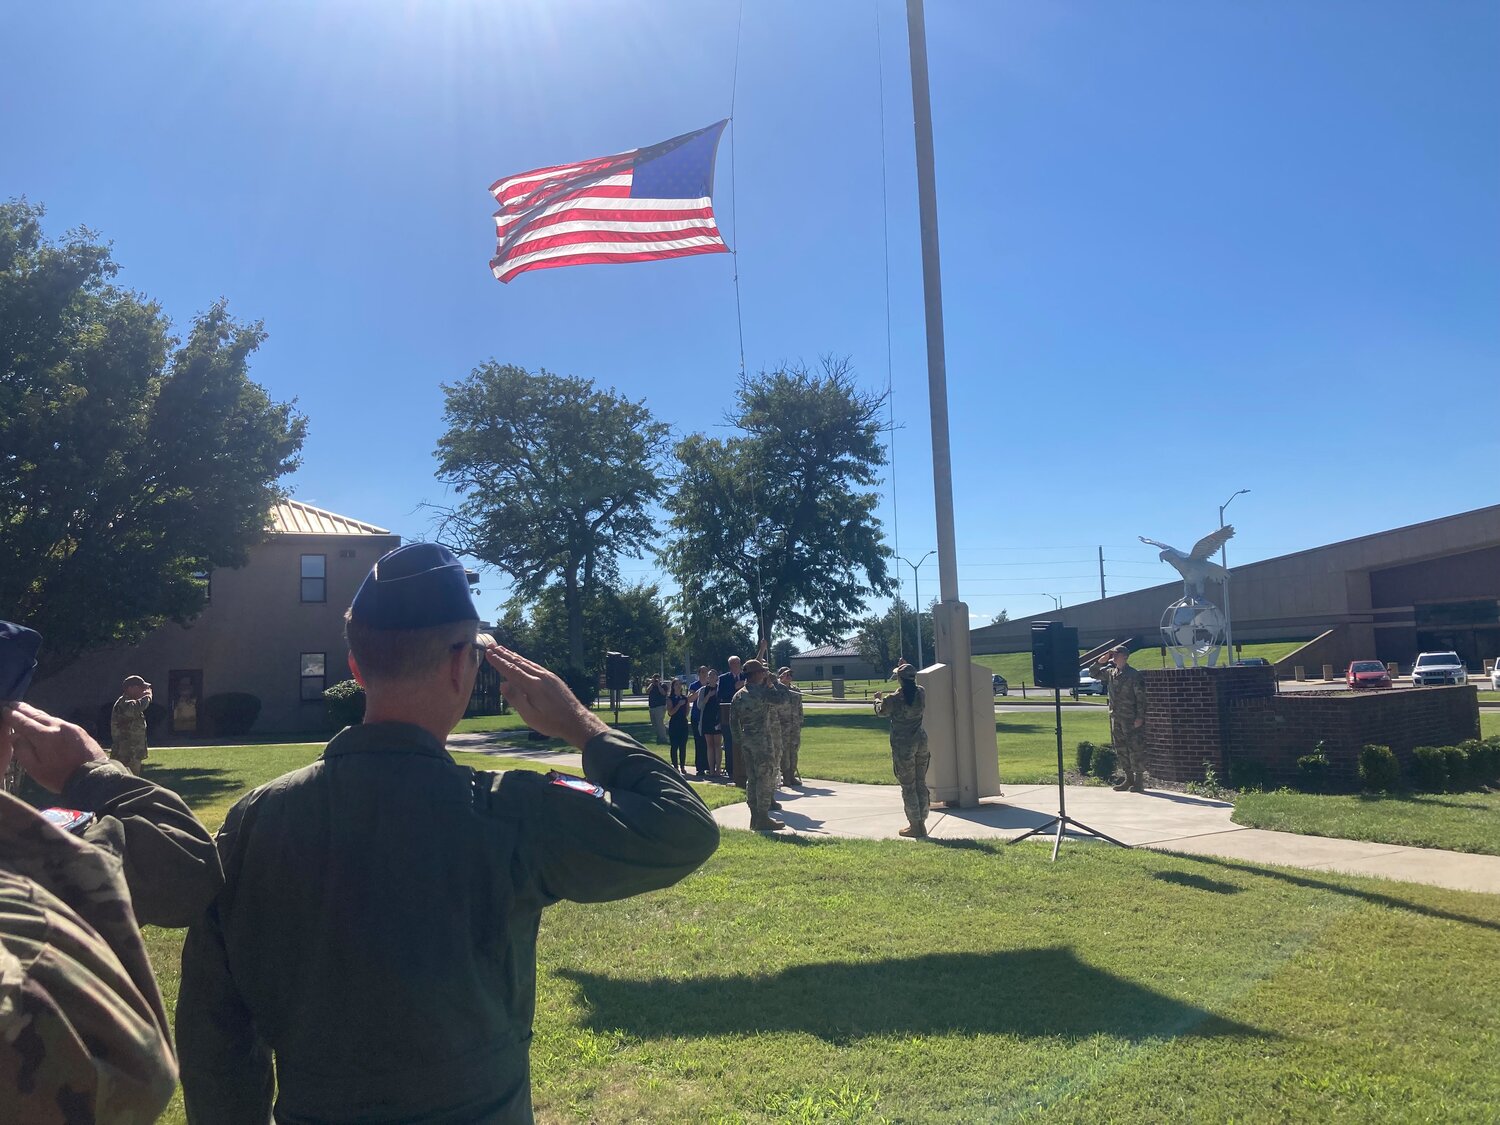 An airman salutes the American flag as it was pulled down and ceremoniously folded near the conclusion of Friday’s POW/MIA National Recognition Day Ceremony at Dover Air Force Base on Friday.